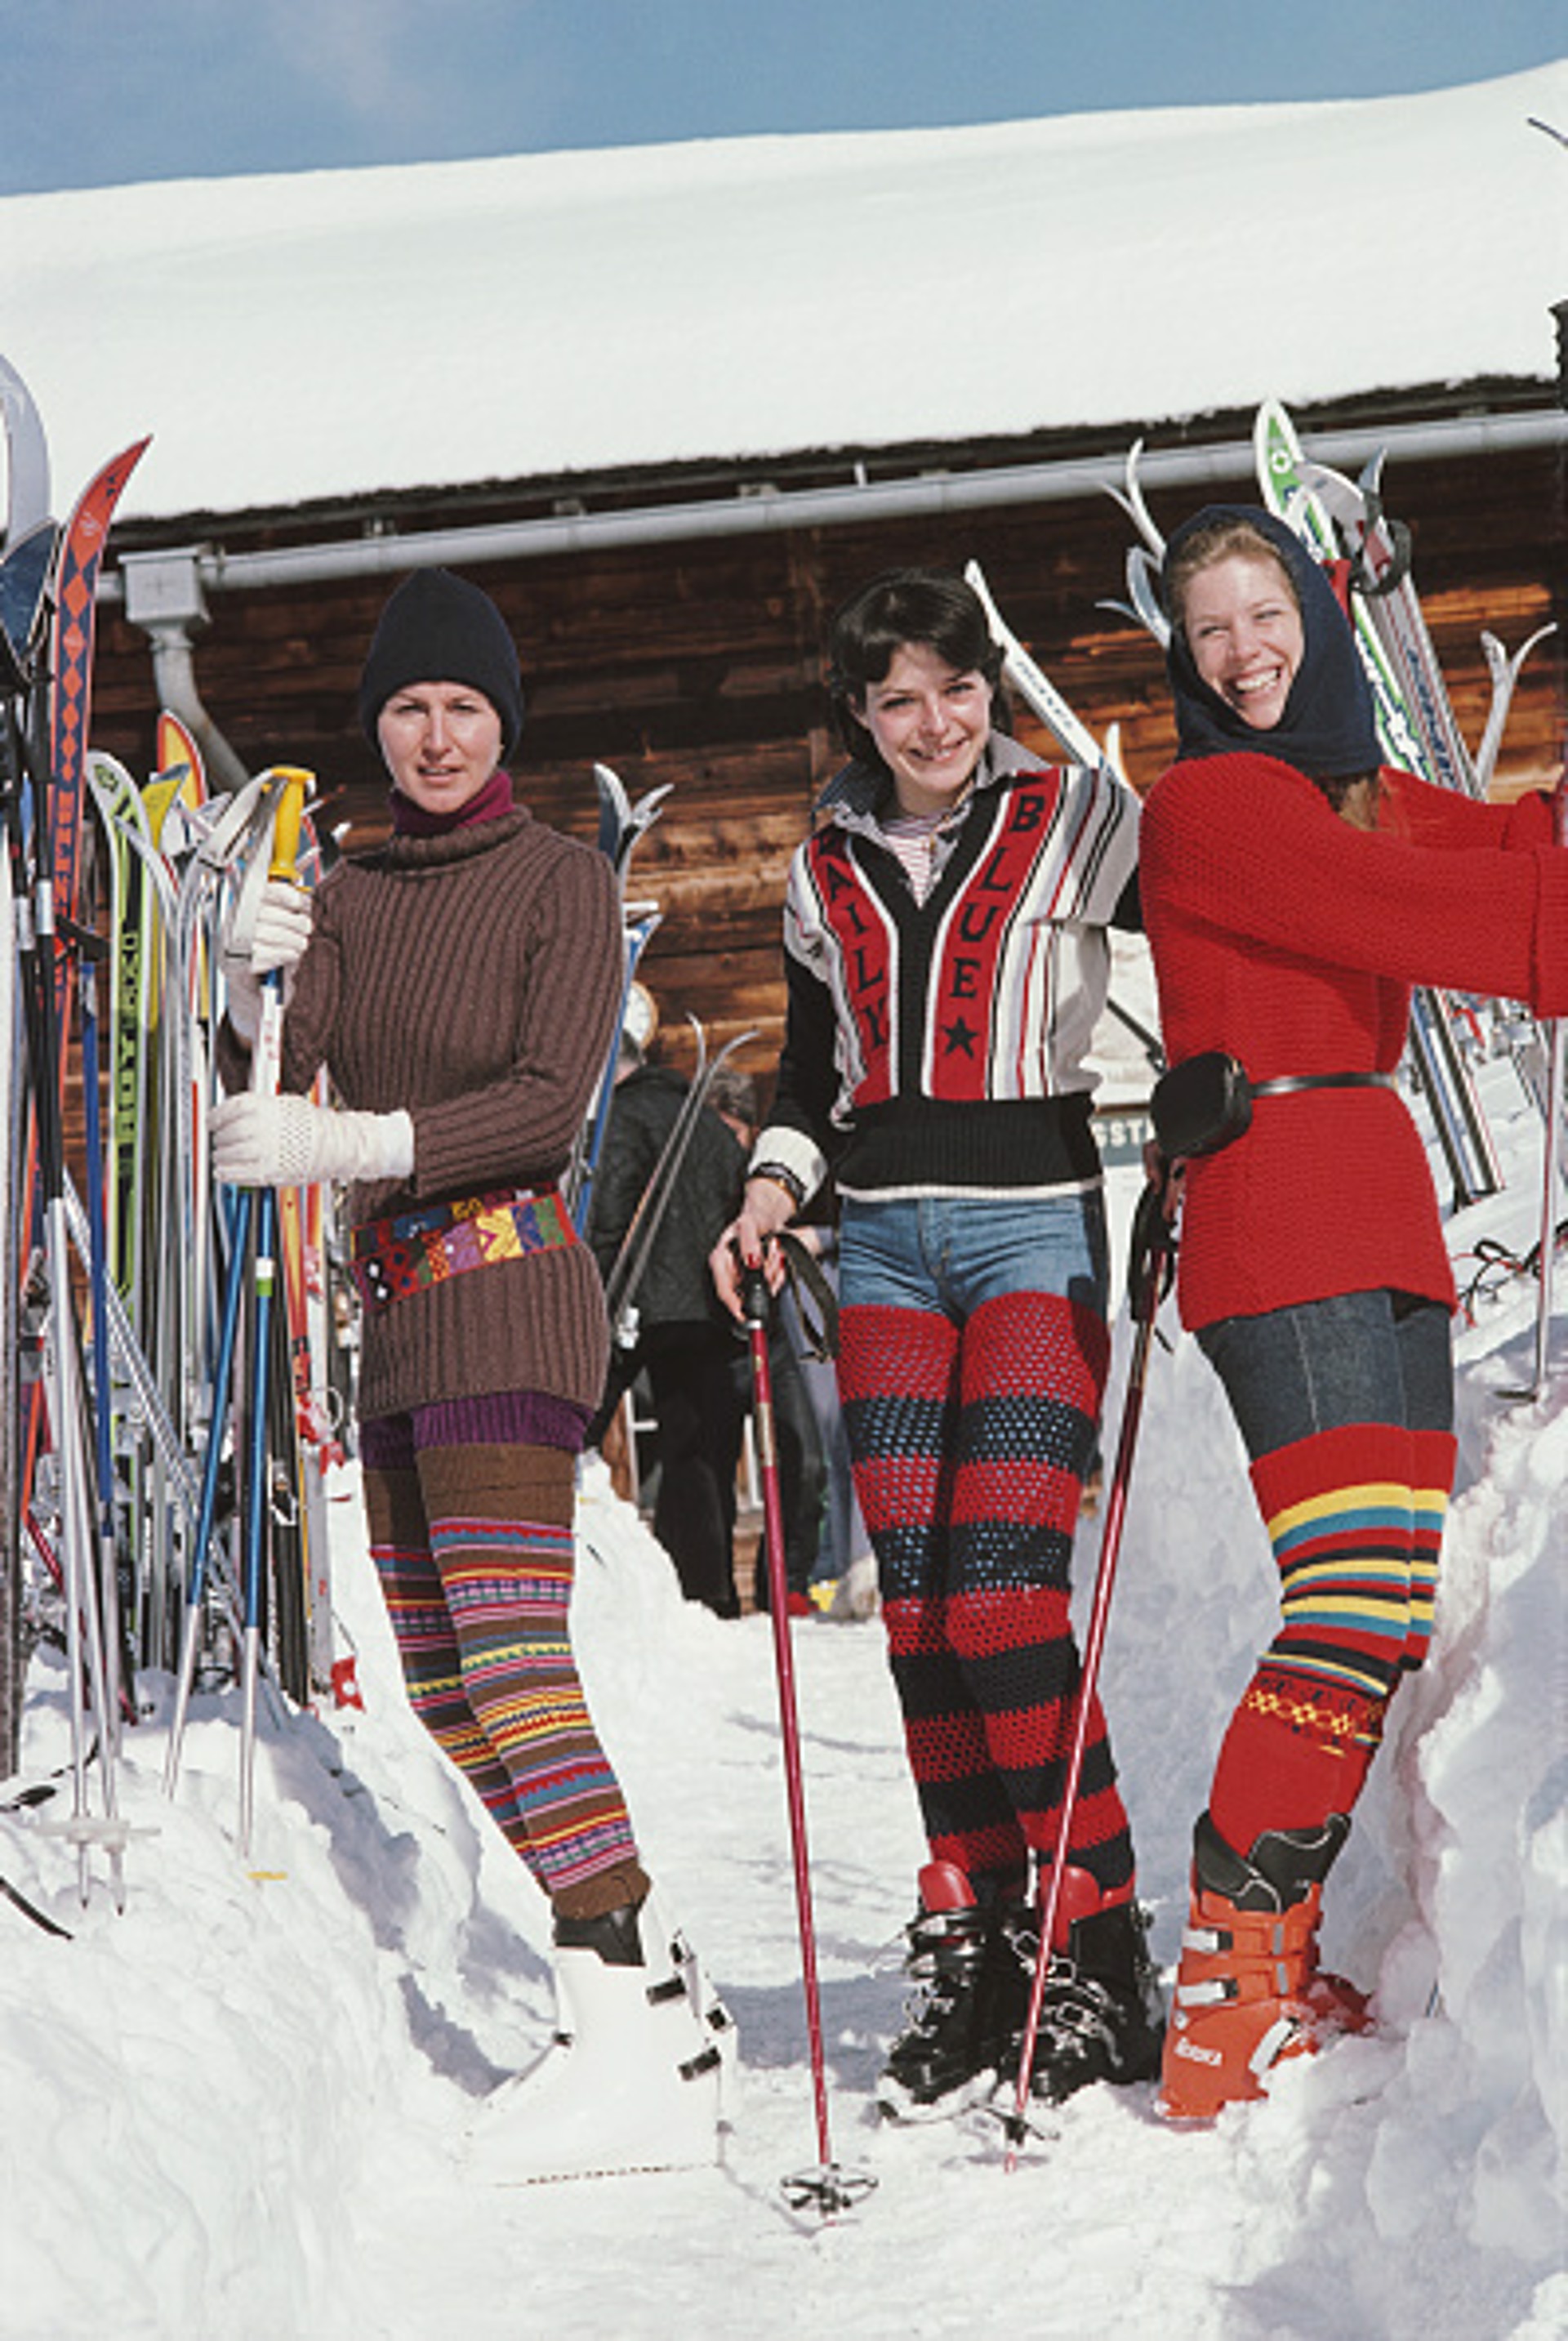 Skiing In Gstaad by Slim Aarons